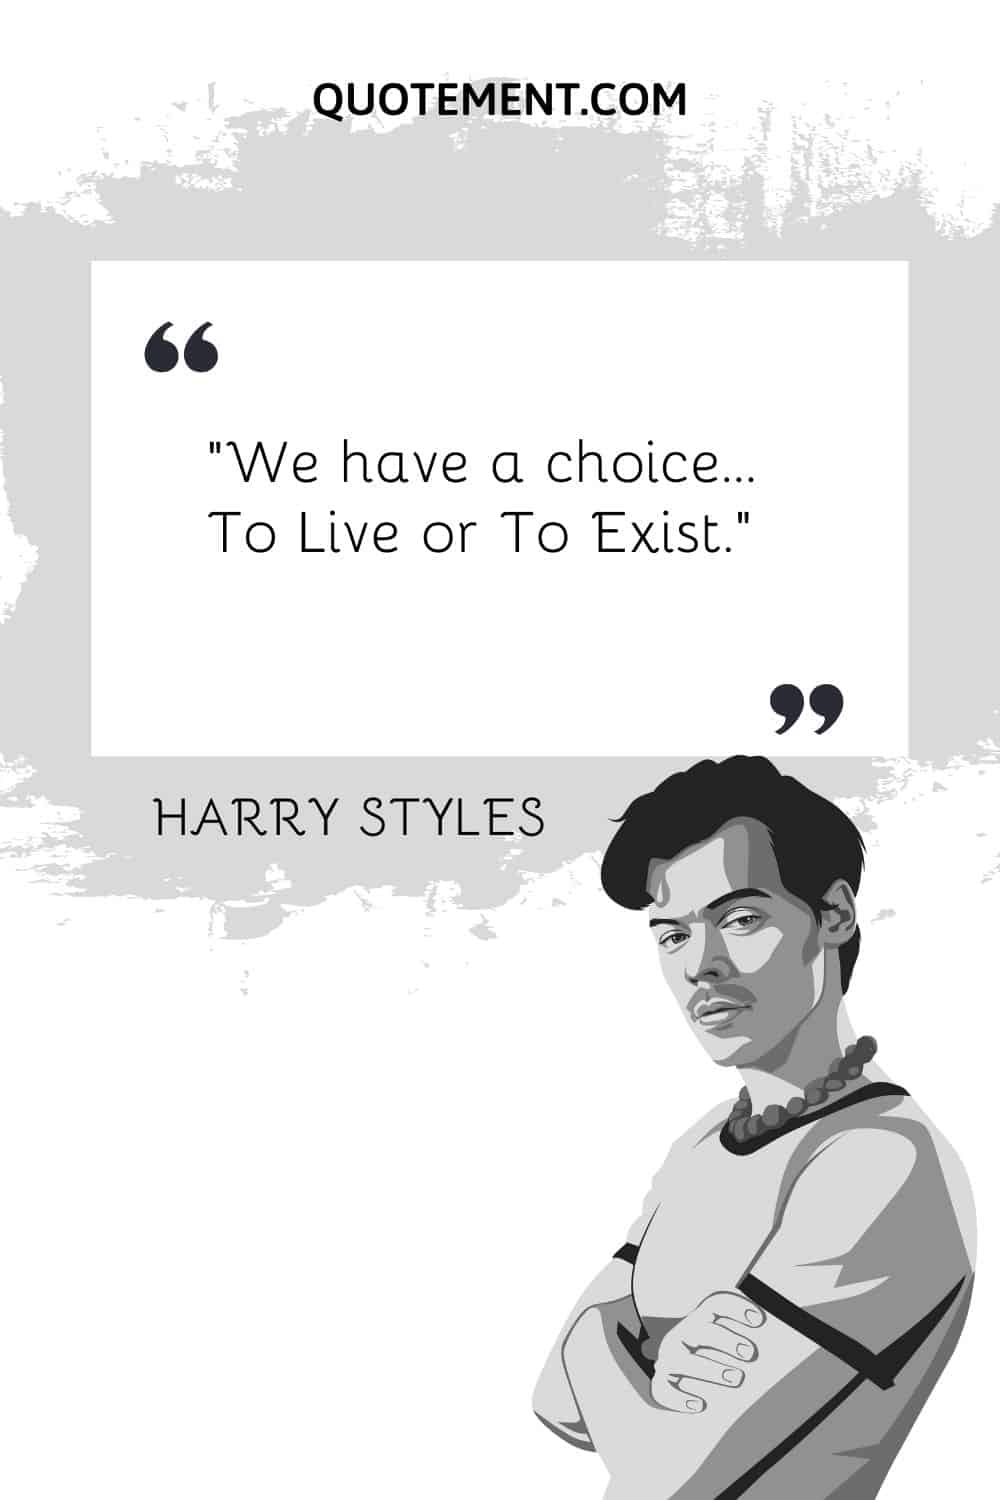 We have a choice… To Live or To Exist